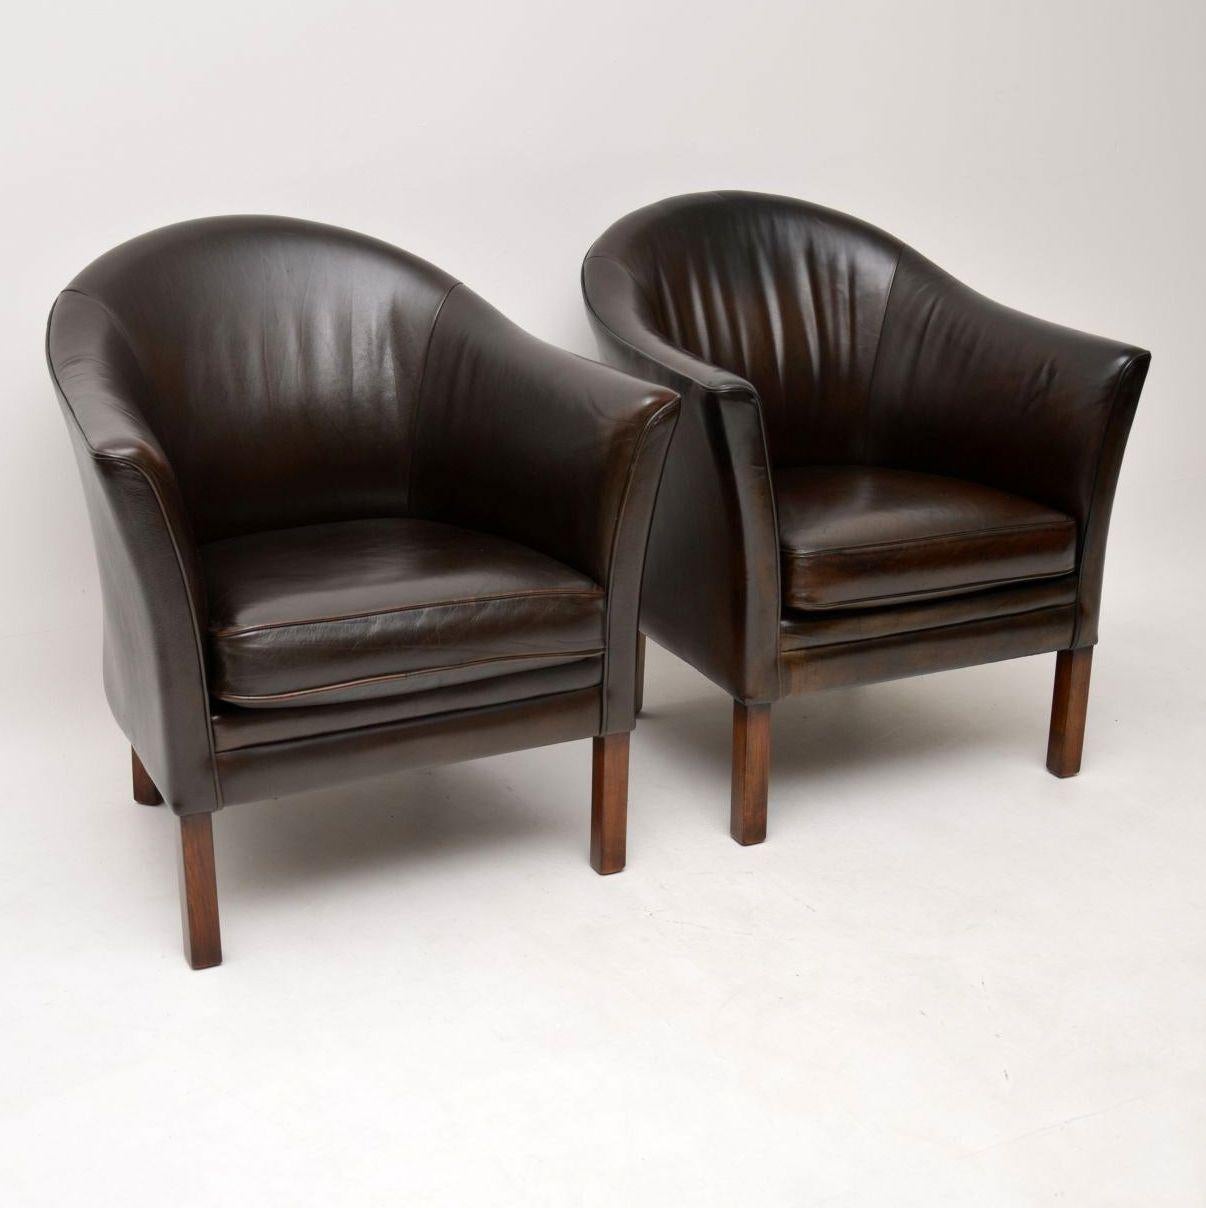 A stunning pair of vintage Danish armchairs made by Mogens Hansen, dating from the 1960s. They are in great condition for their age, the leather has been hand colored and revived by our professional leather polisher. They have a beautiful patina,